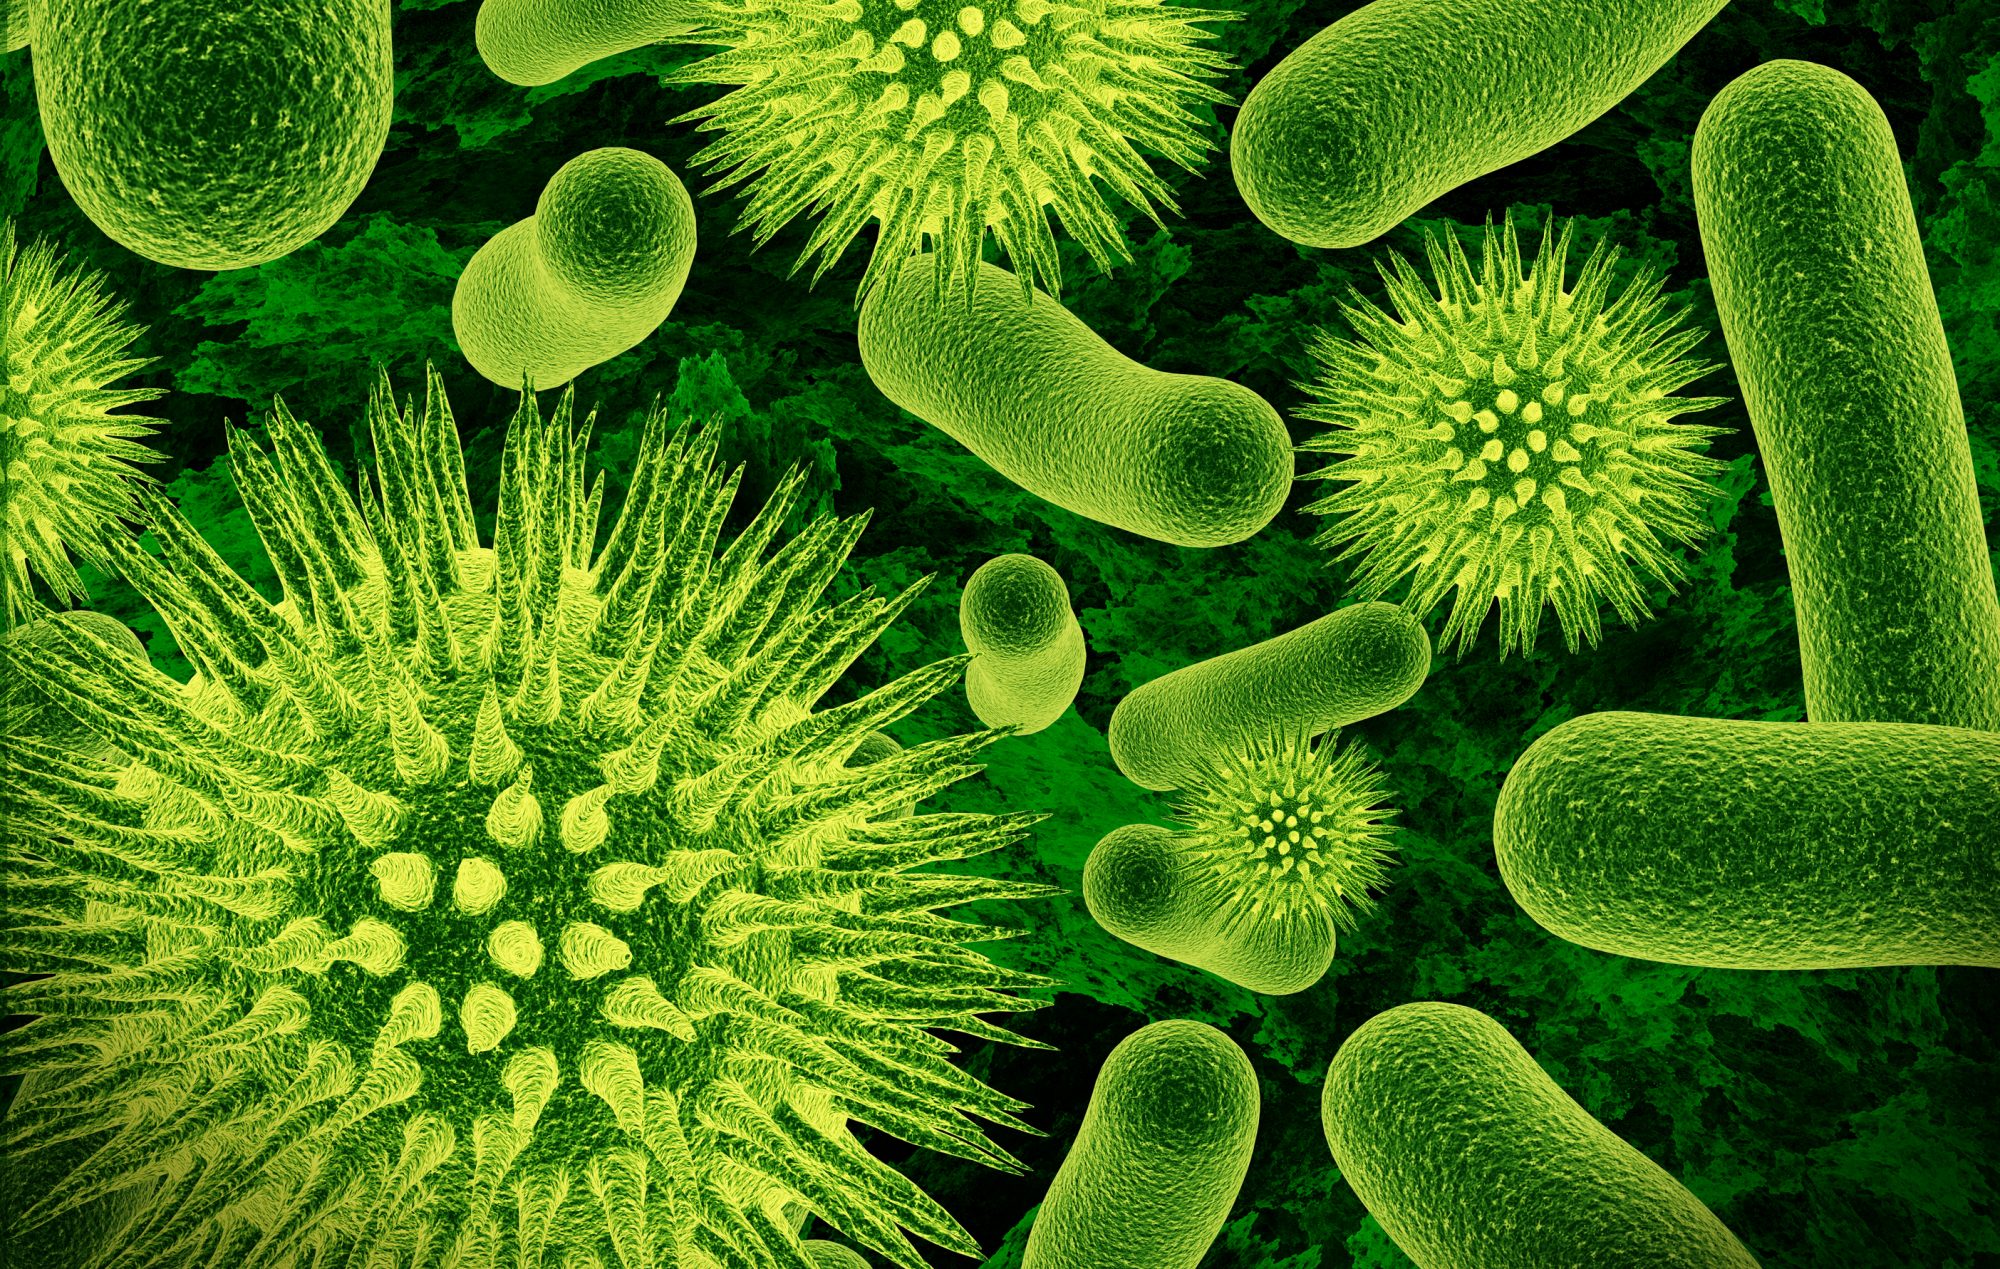 Antimicrobial nanocoatings: Functional and preventative benefits